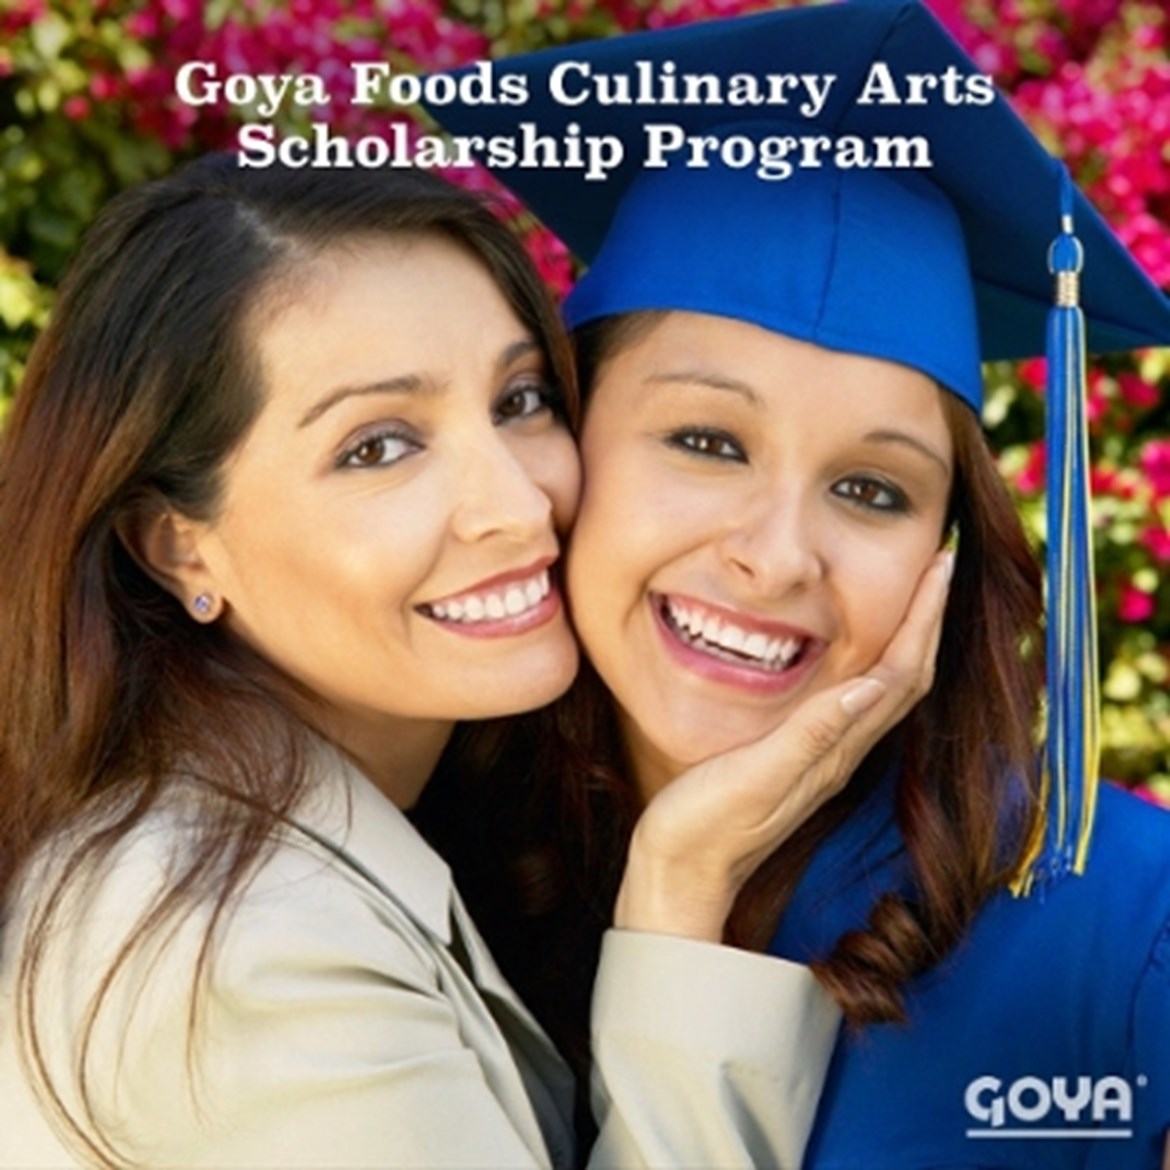 Press Release: Goya Foods, America’s largest Hispanic food company, today announced a new annual nationwide Culinary Arts and Food Sciences Scholarship Program offered to four students entering their freshman year of college to obtain their first undergraduate degree in culinary arts and/or food sciences.